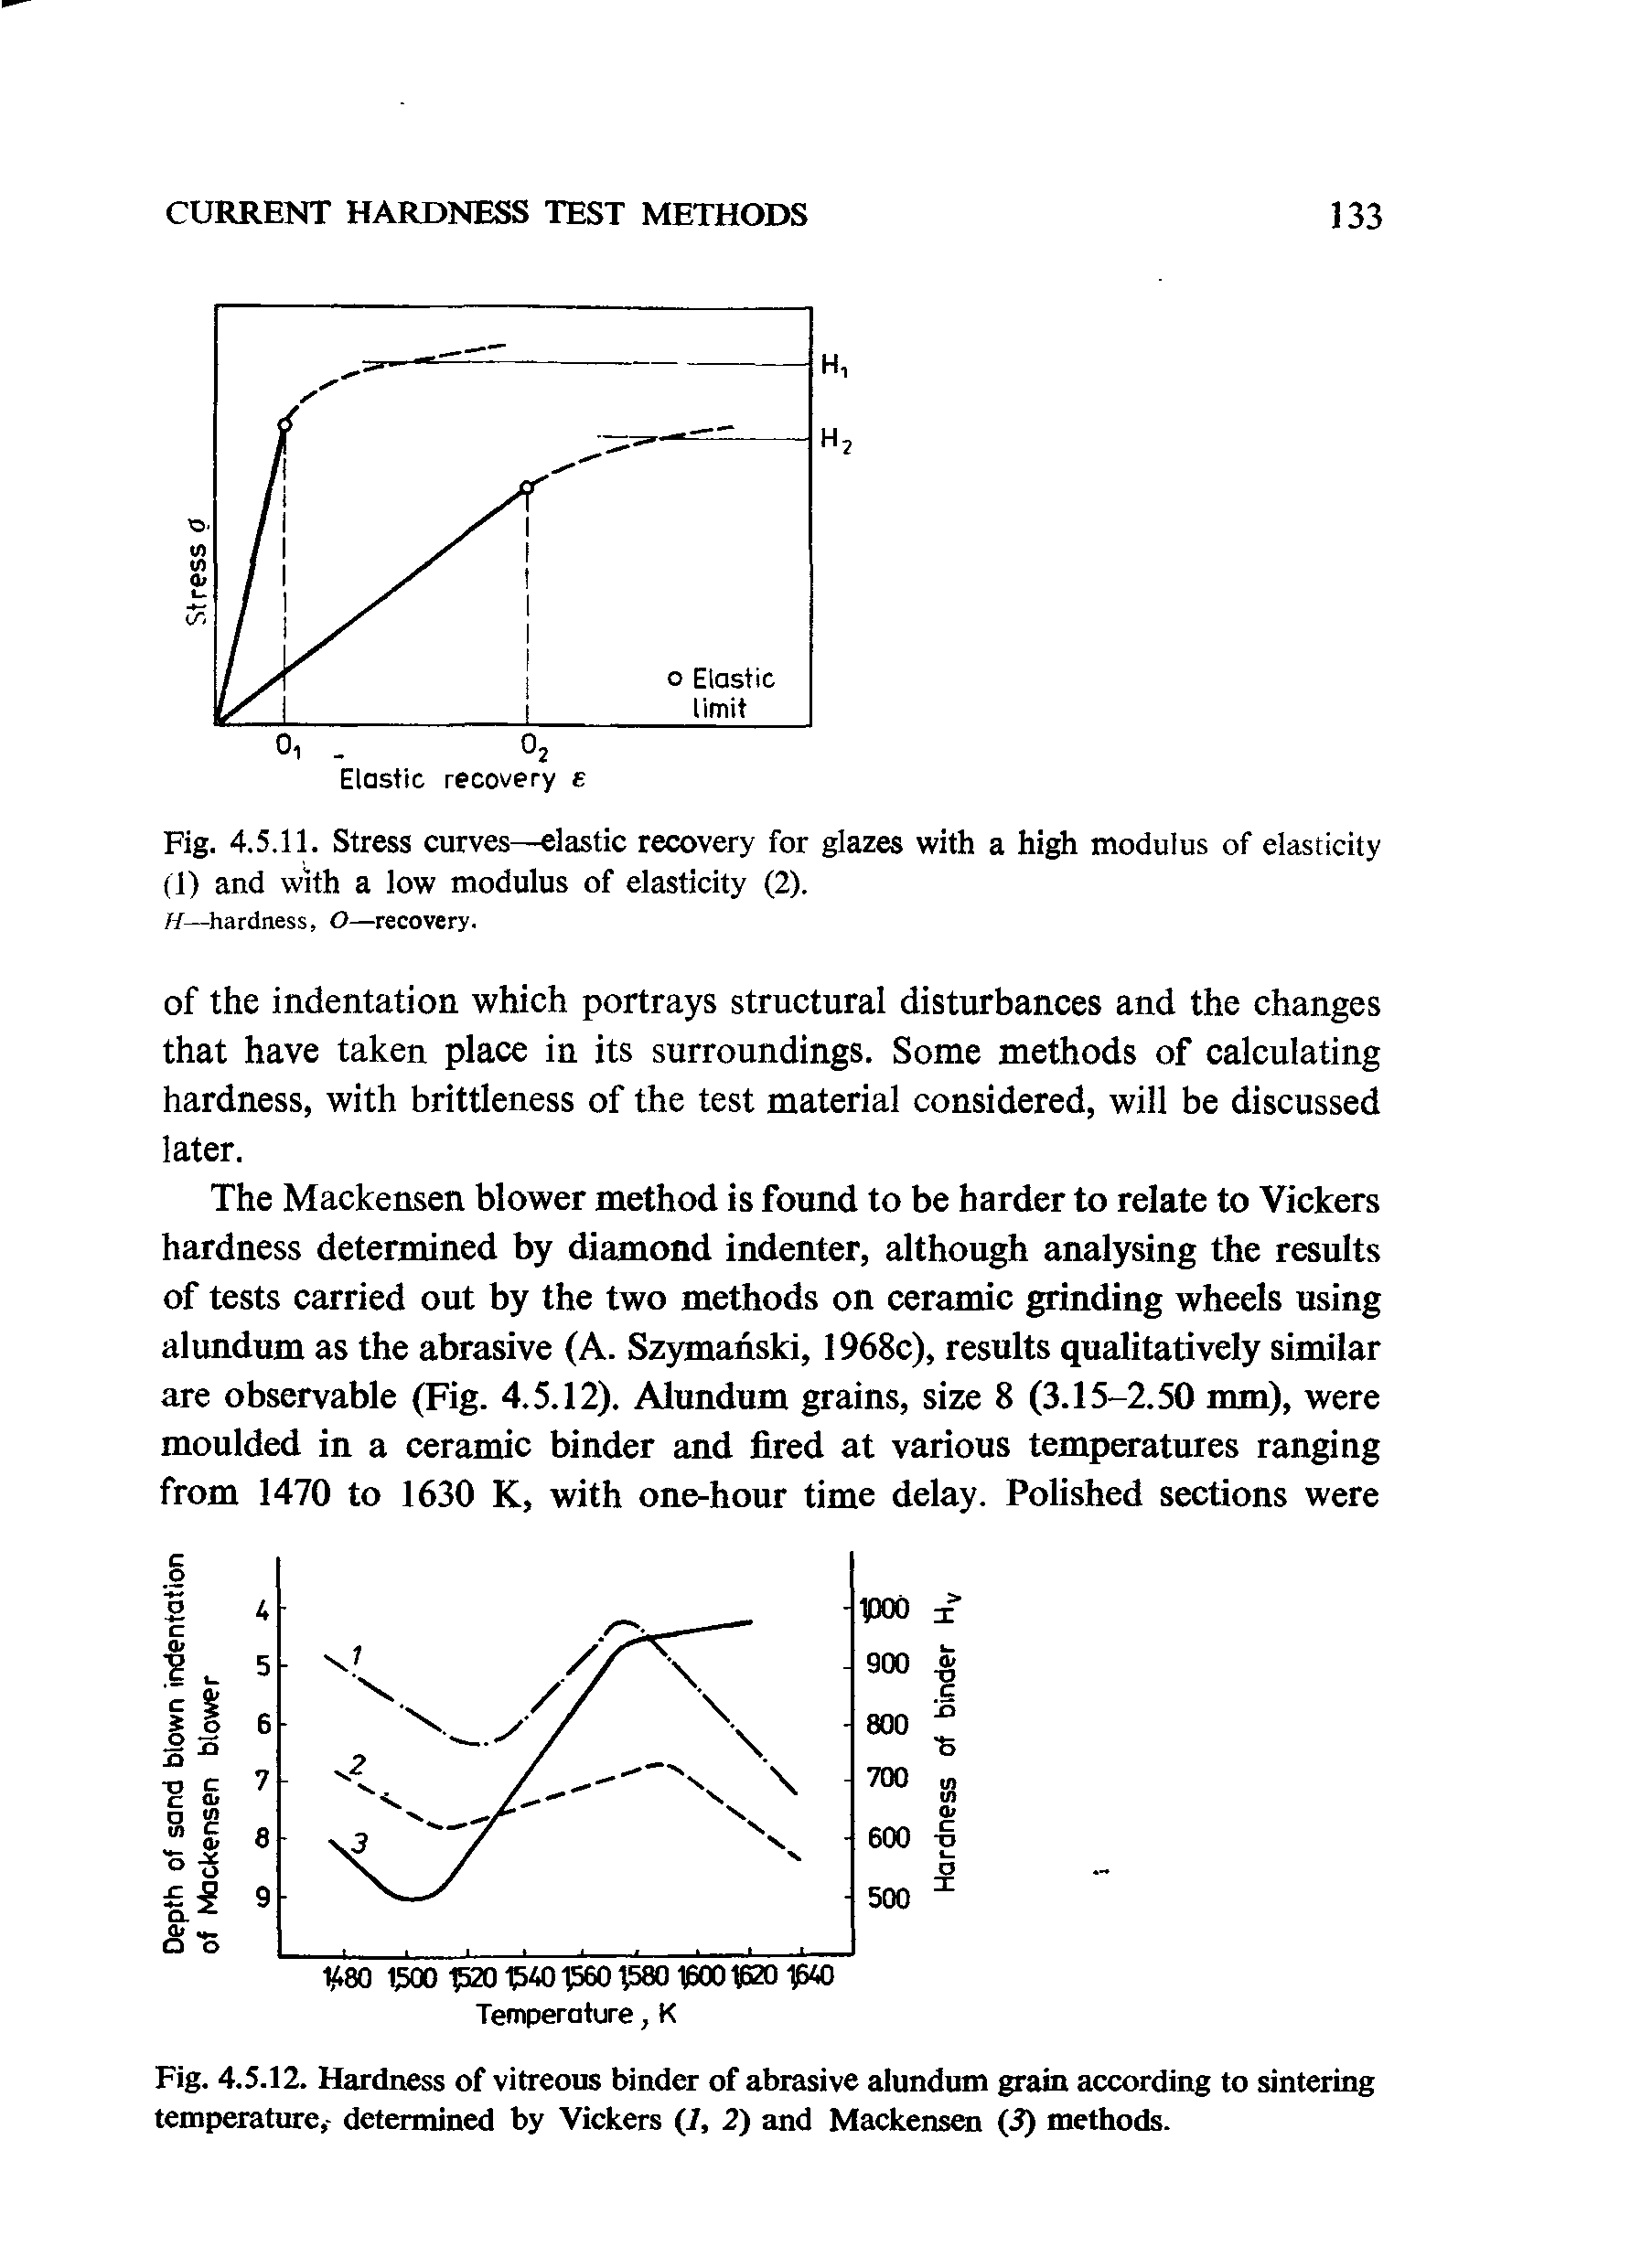 Fig. 4.5.11. Stress curves—elastic recovery for glazes with a high modulus of elasticity (1) and with a low modulus of elasticity (2).